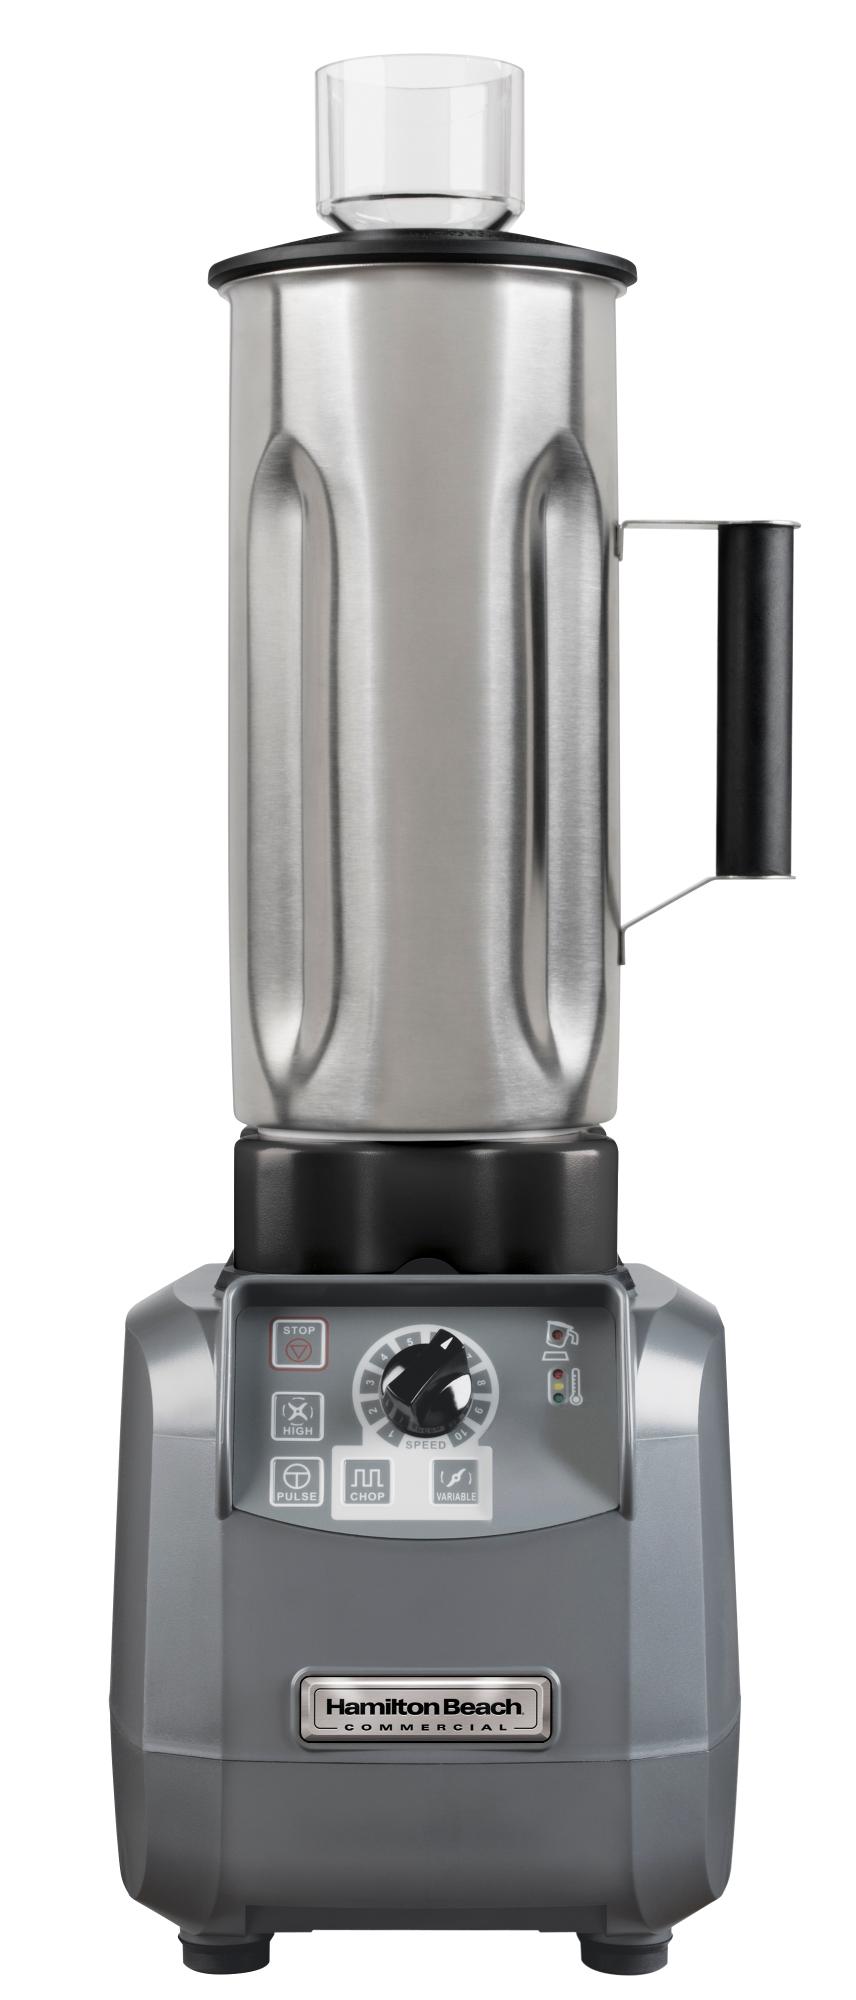 EXPEDITOR 600S Culinary Blender